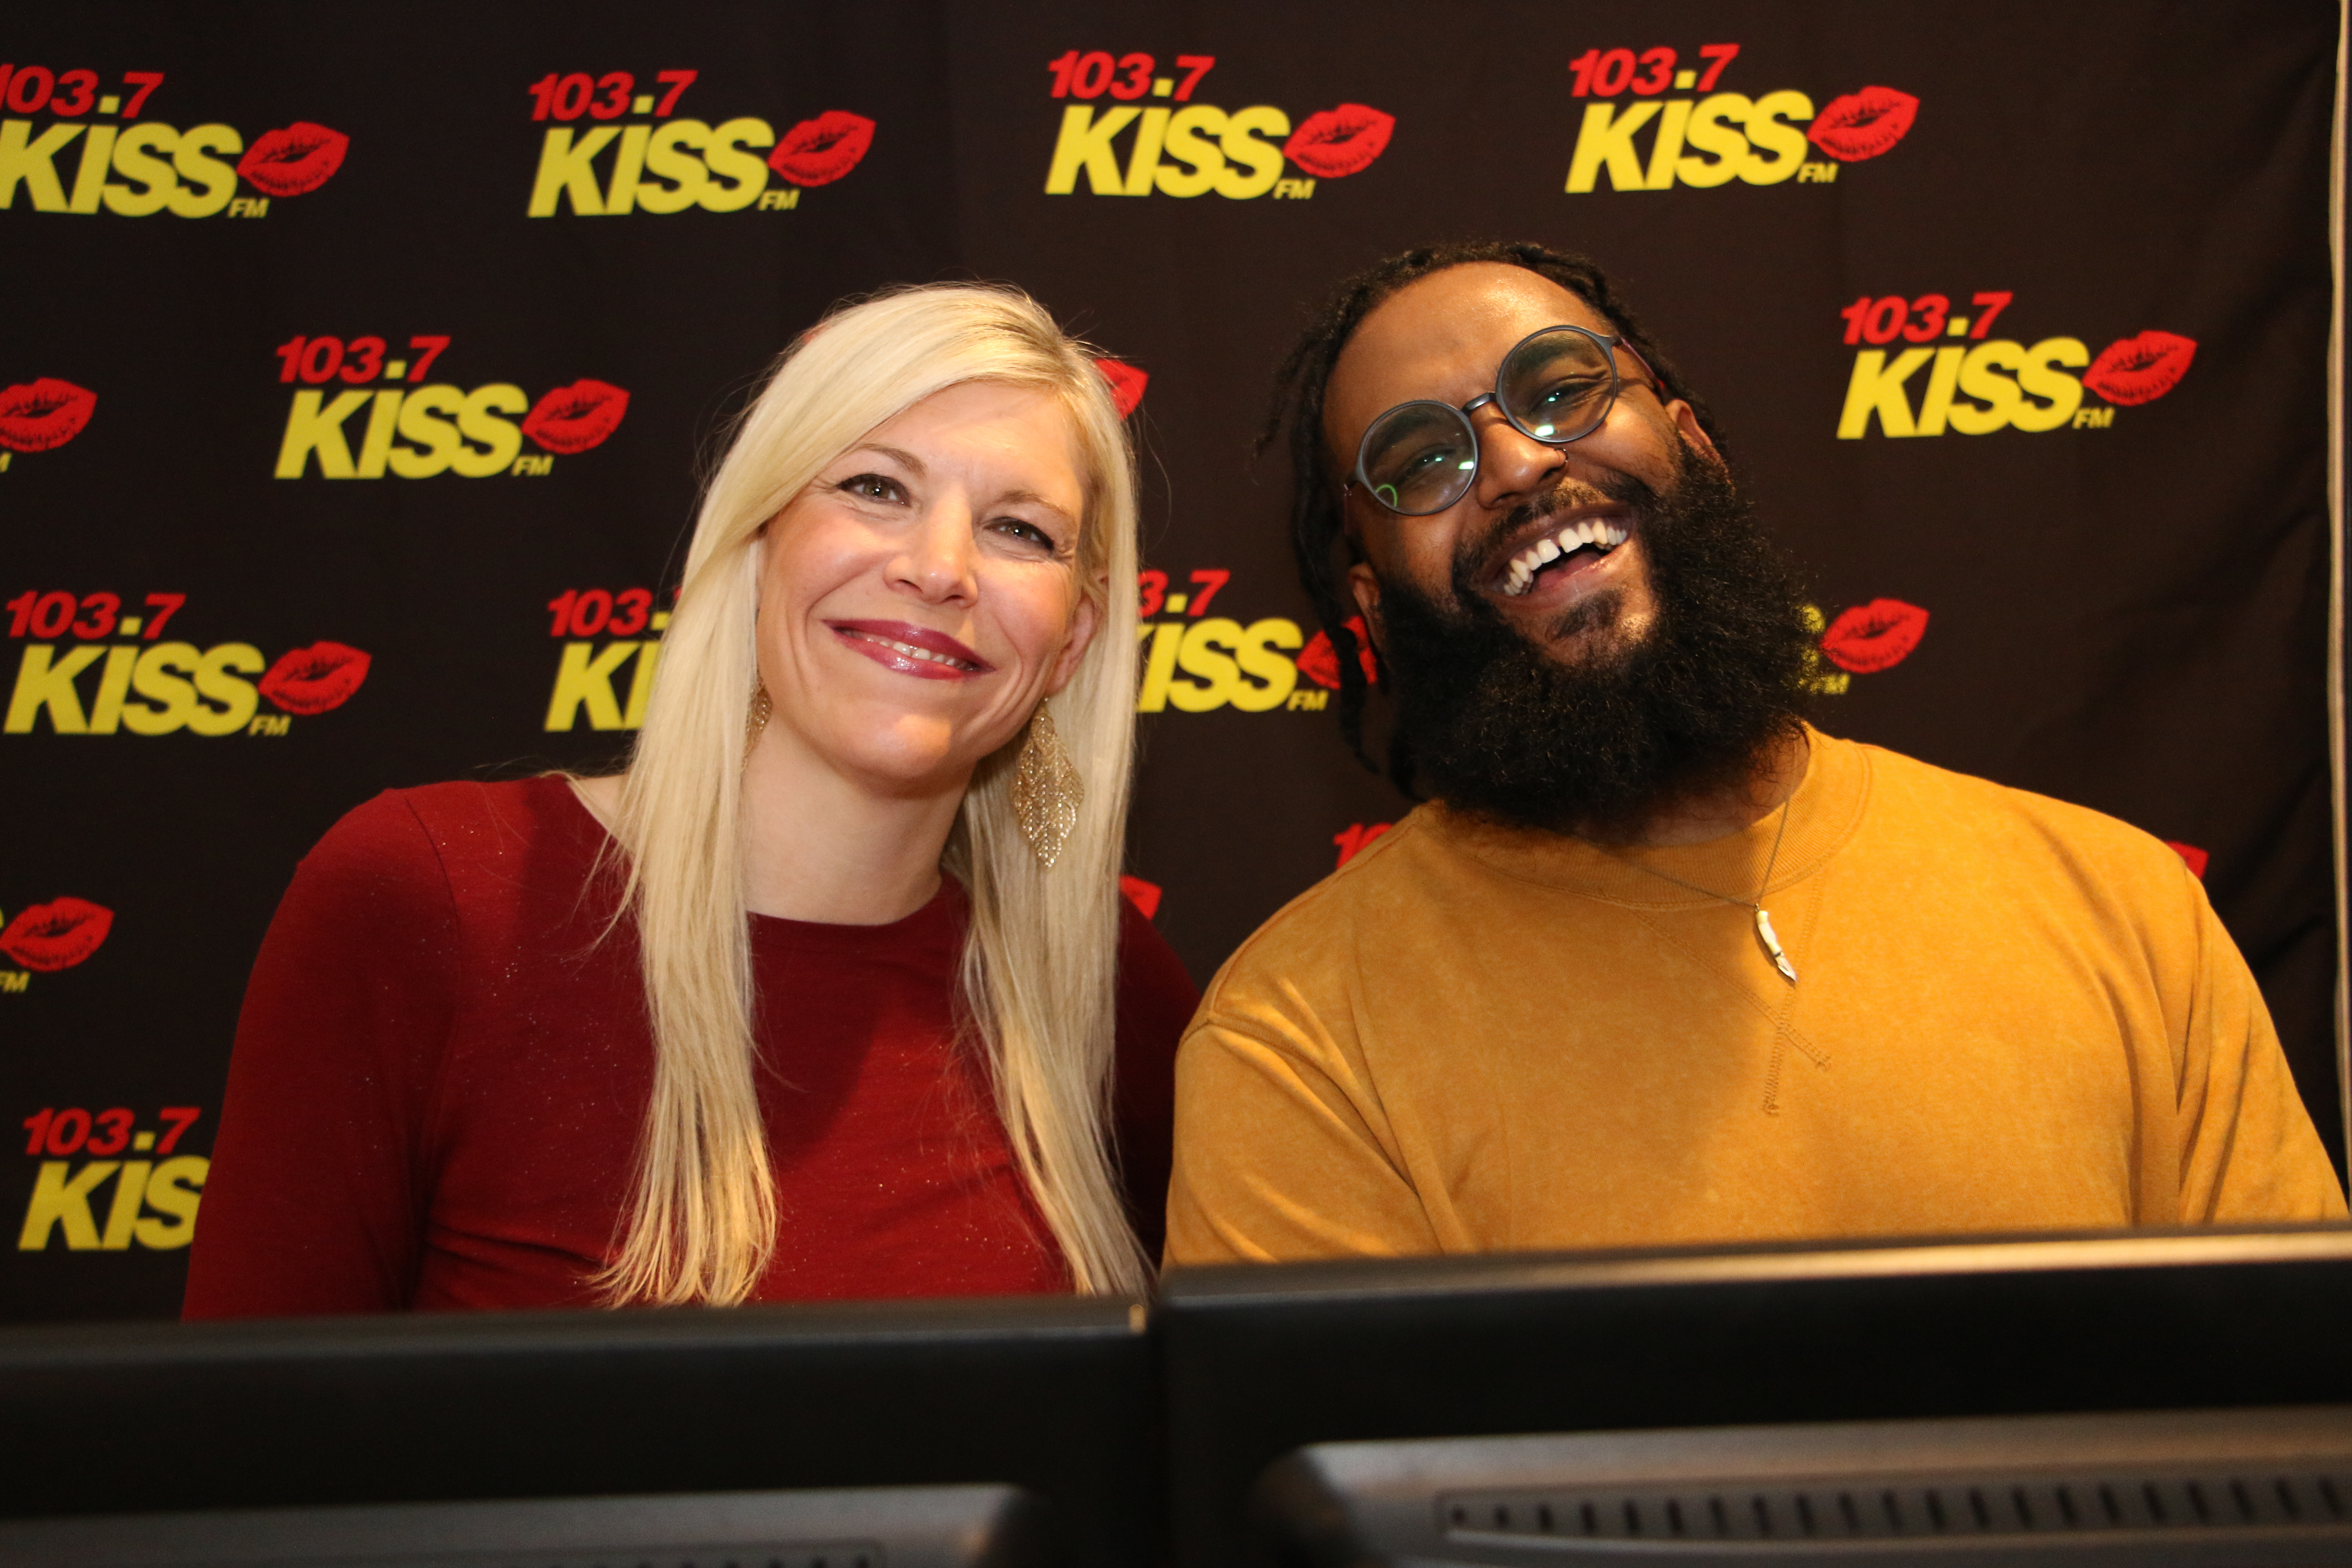 KISS Mornings with Alley and DZ - Tuesday March 28, 2023